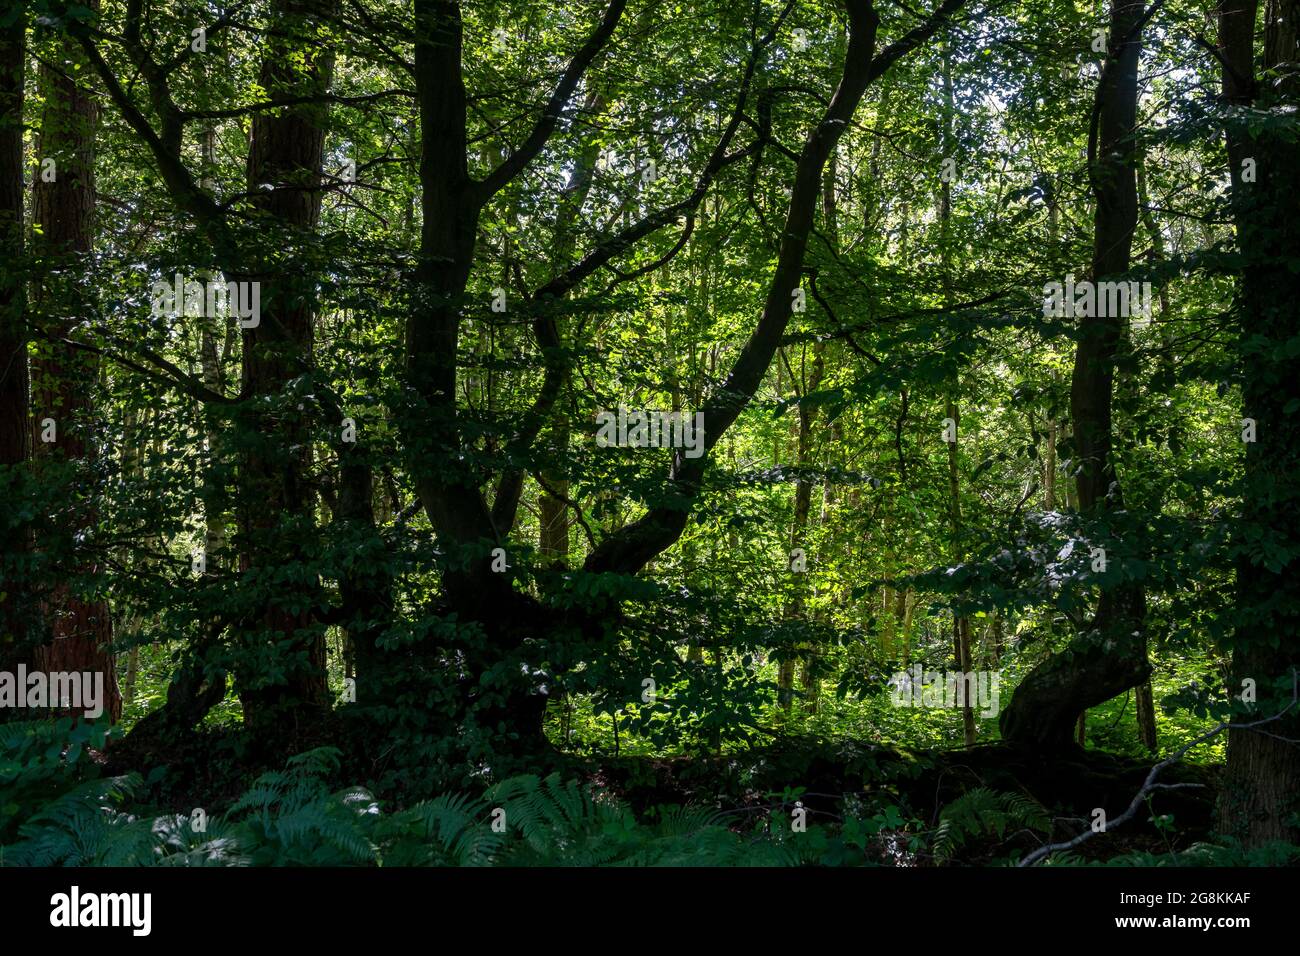 Looking into a dense area of woodland showing dappled sunlight coming through trees Stock Photo